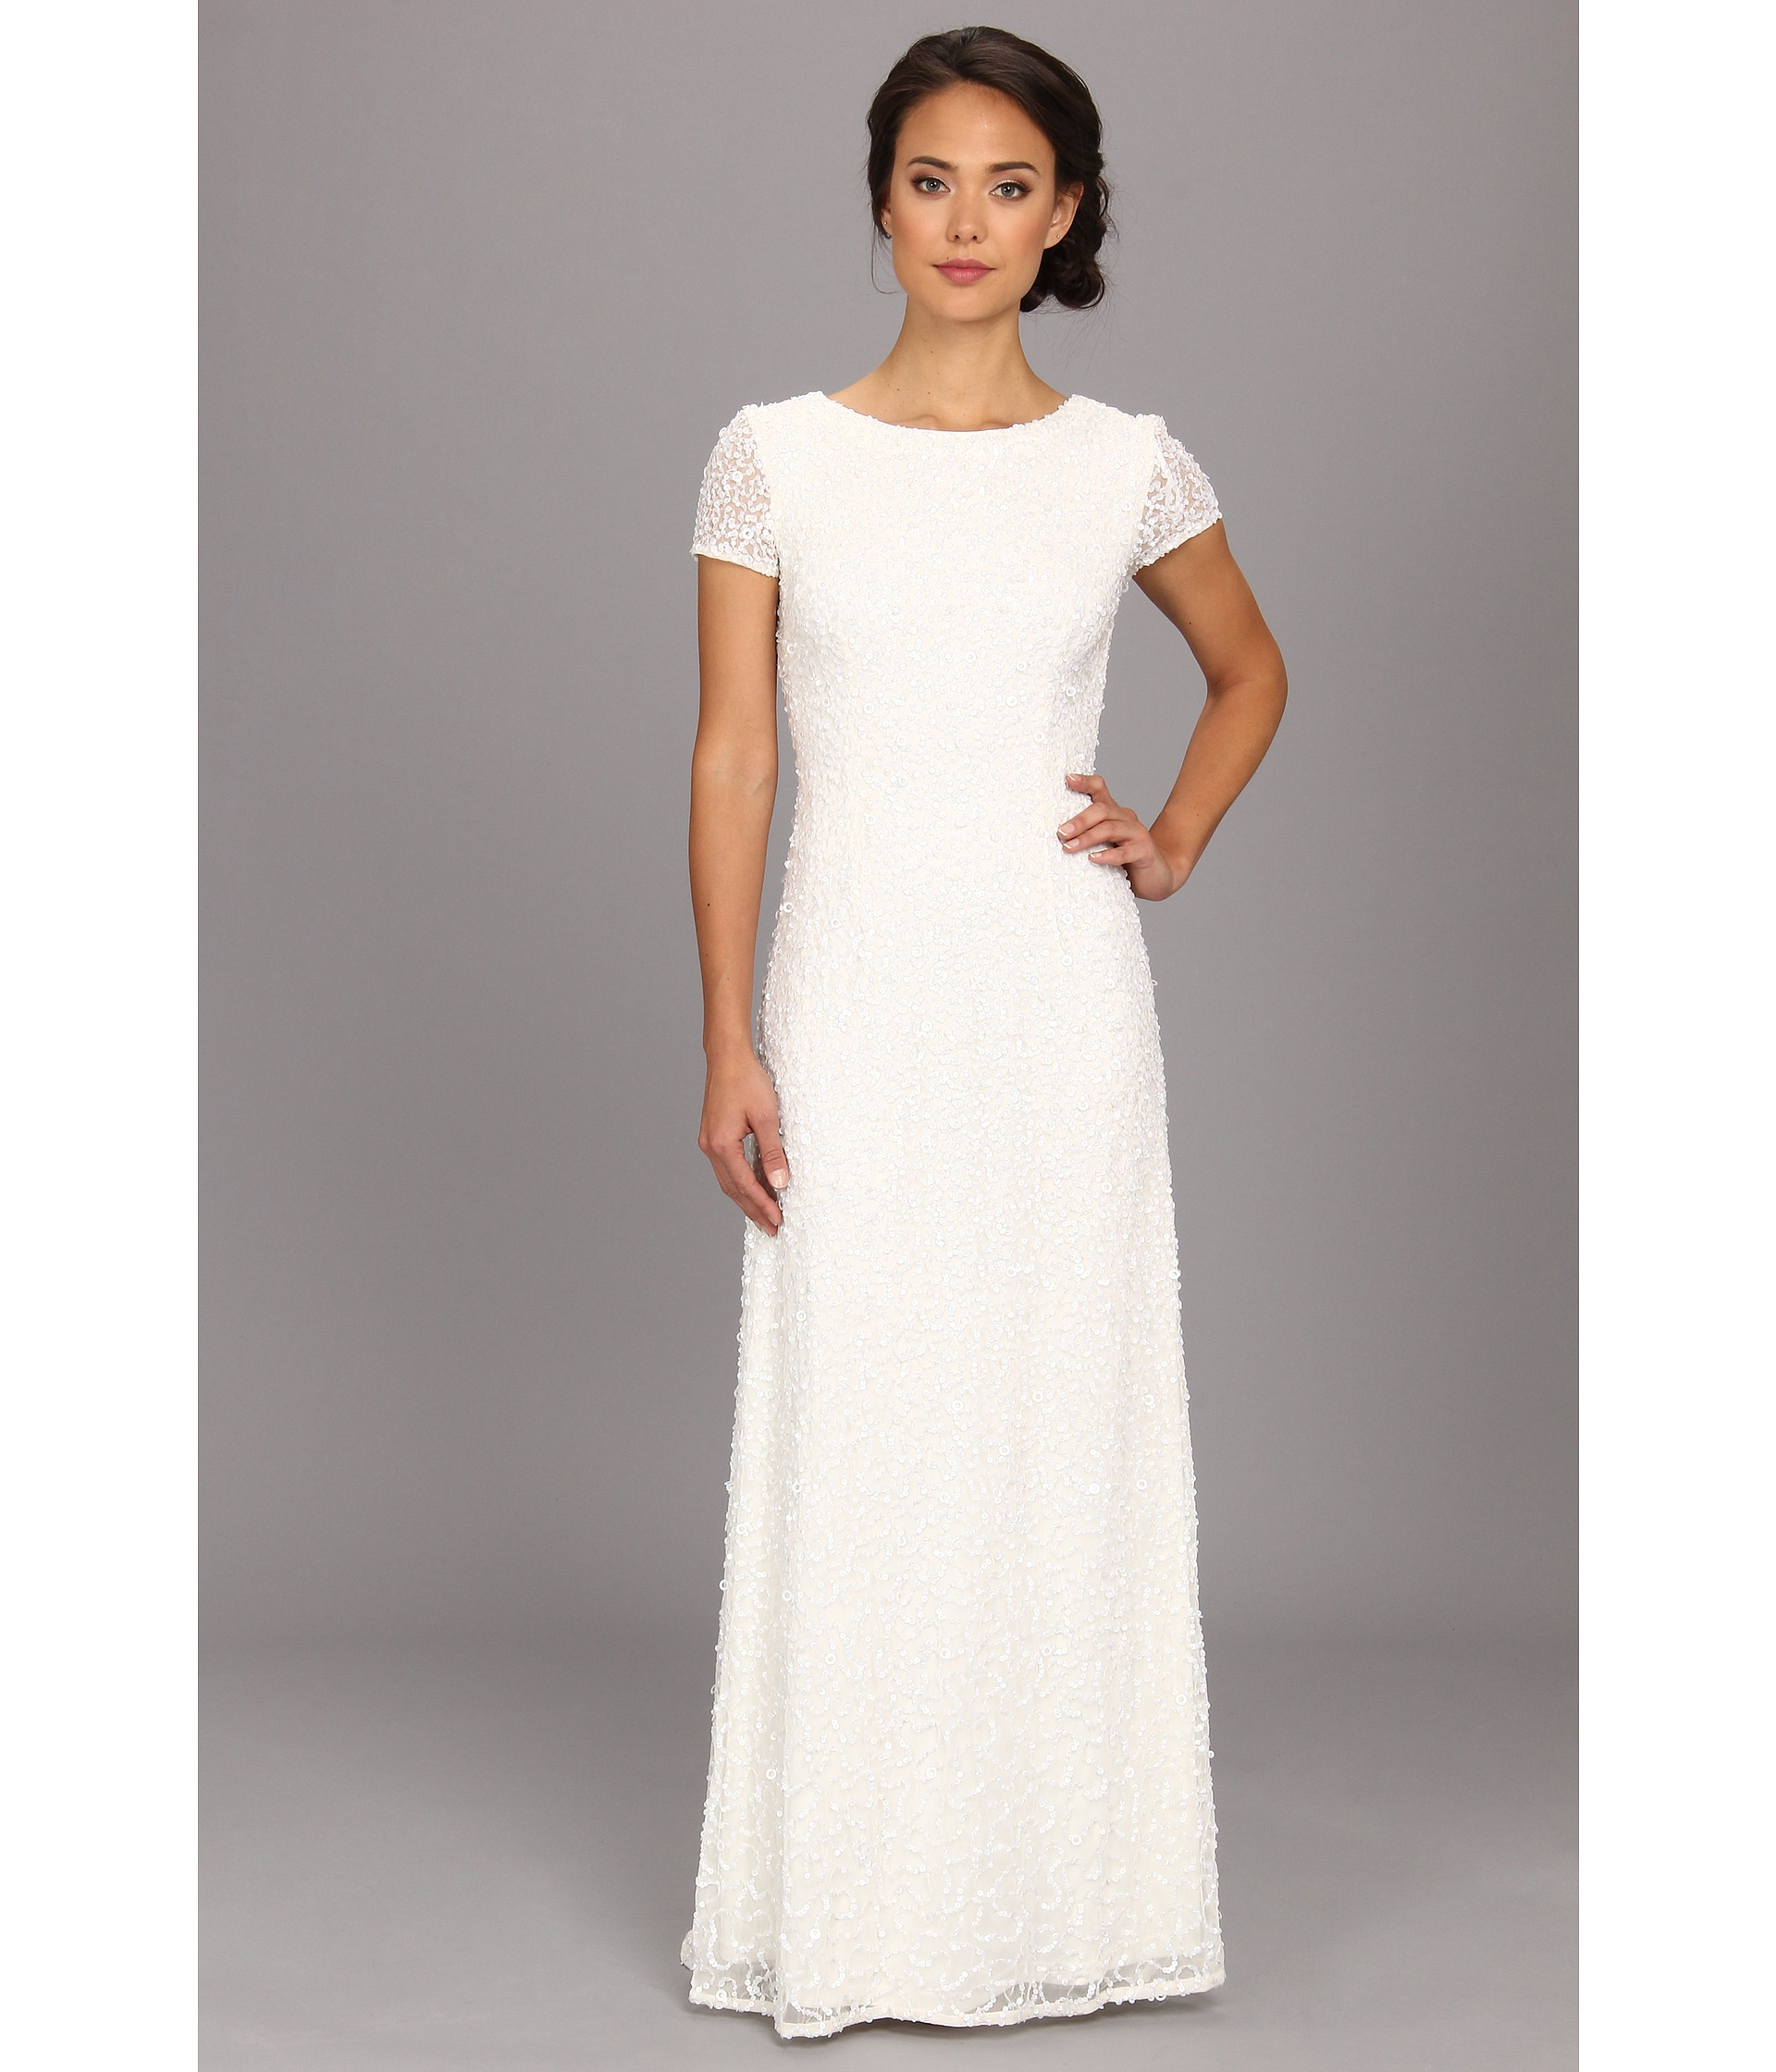 Lyst - Adrianna Papell Cap Sleeve Scoop Back Beaded Down Dress in White